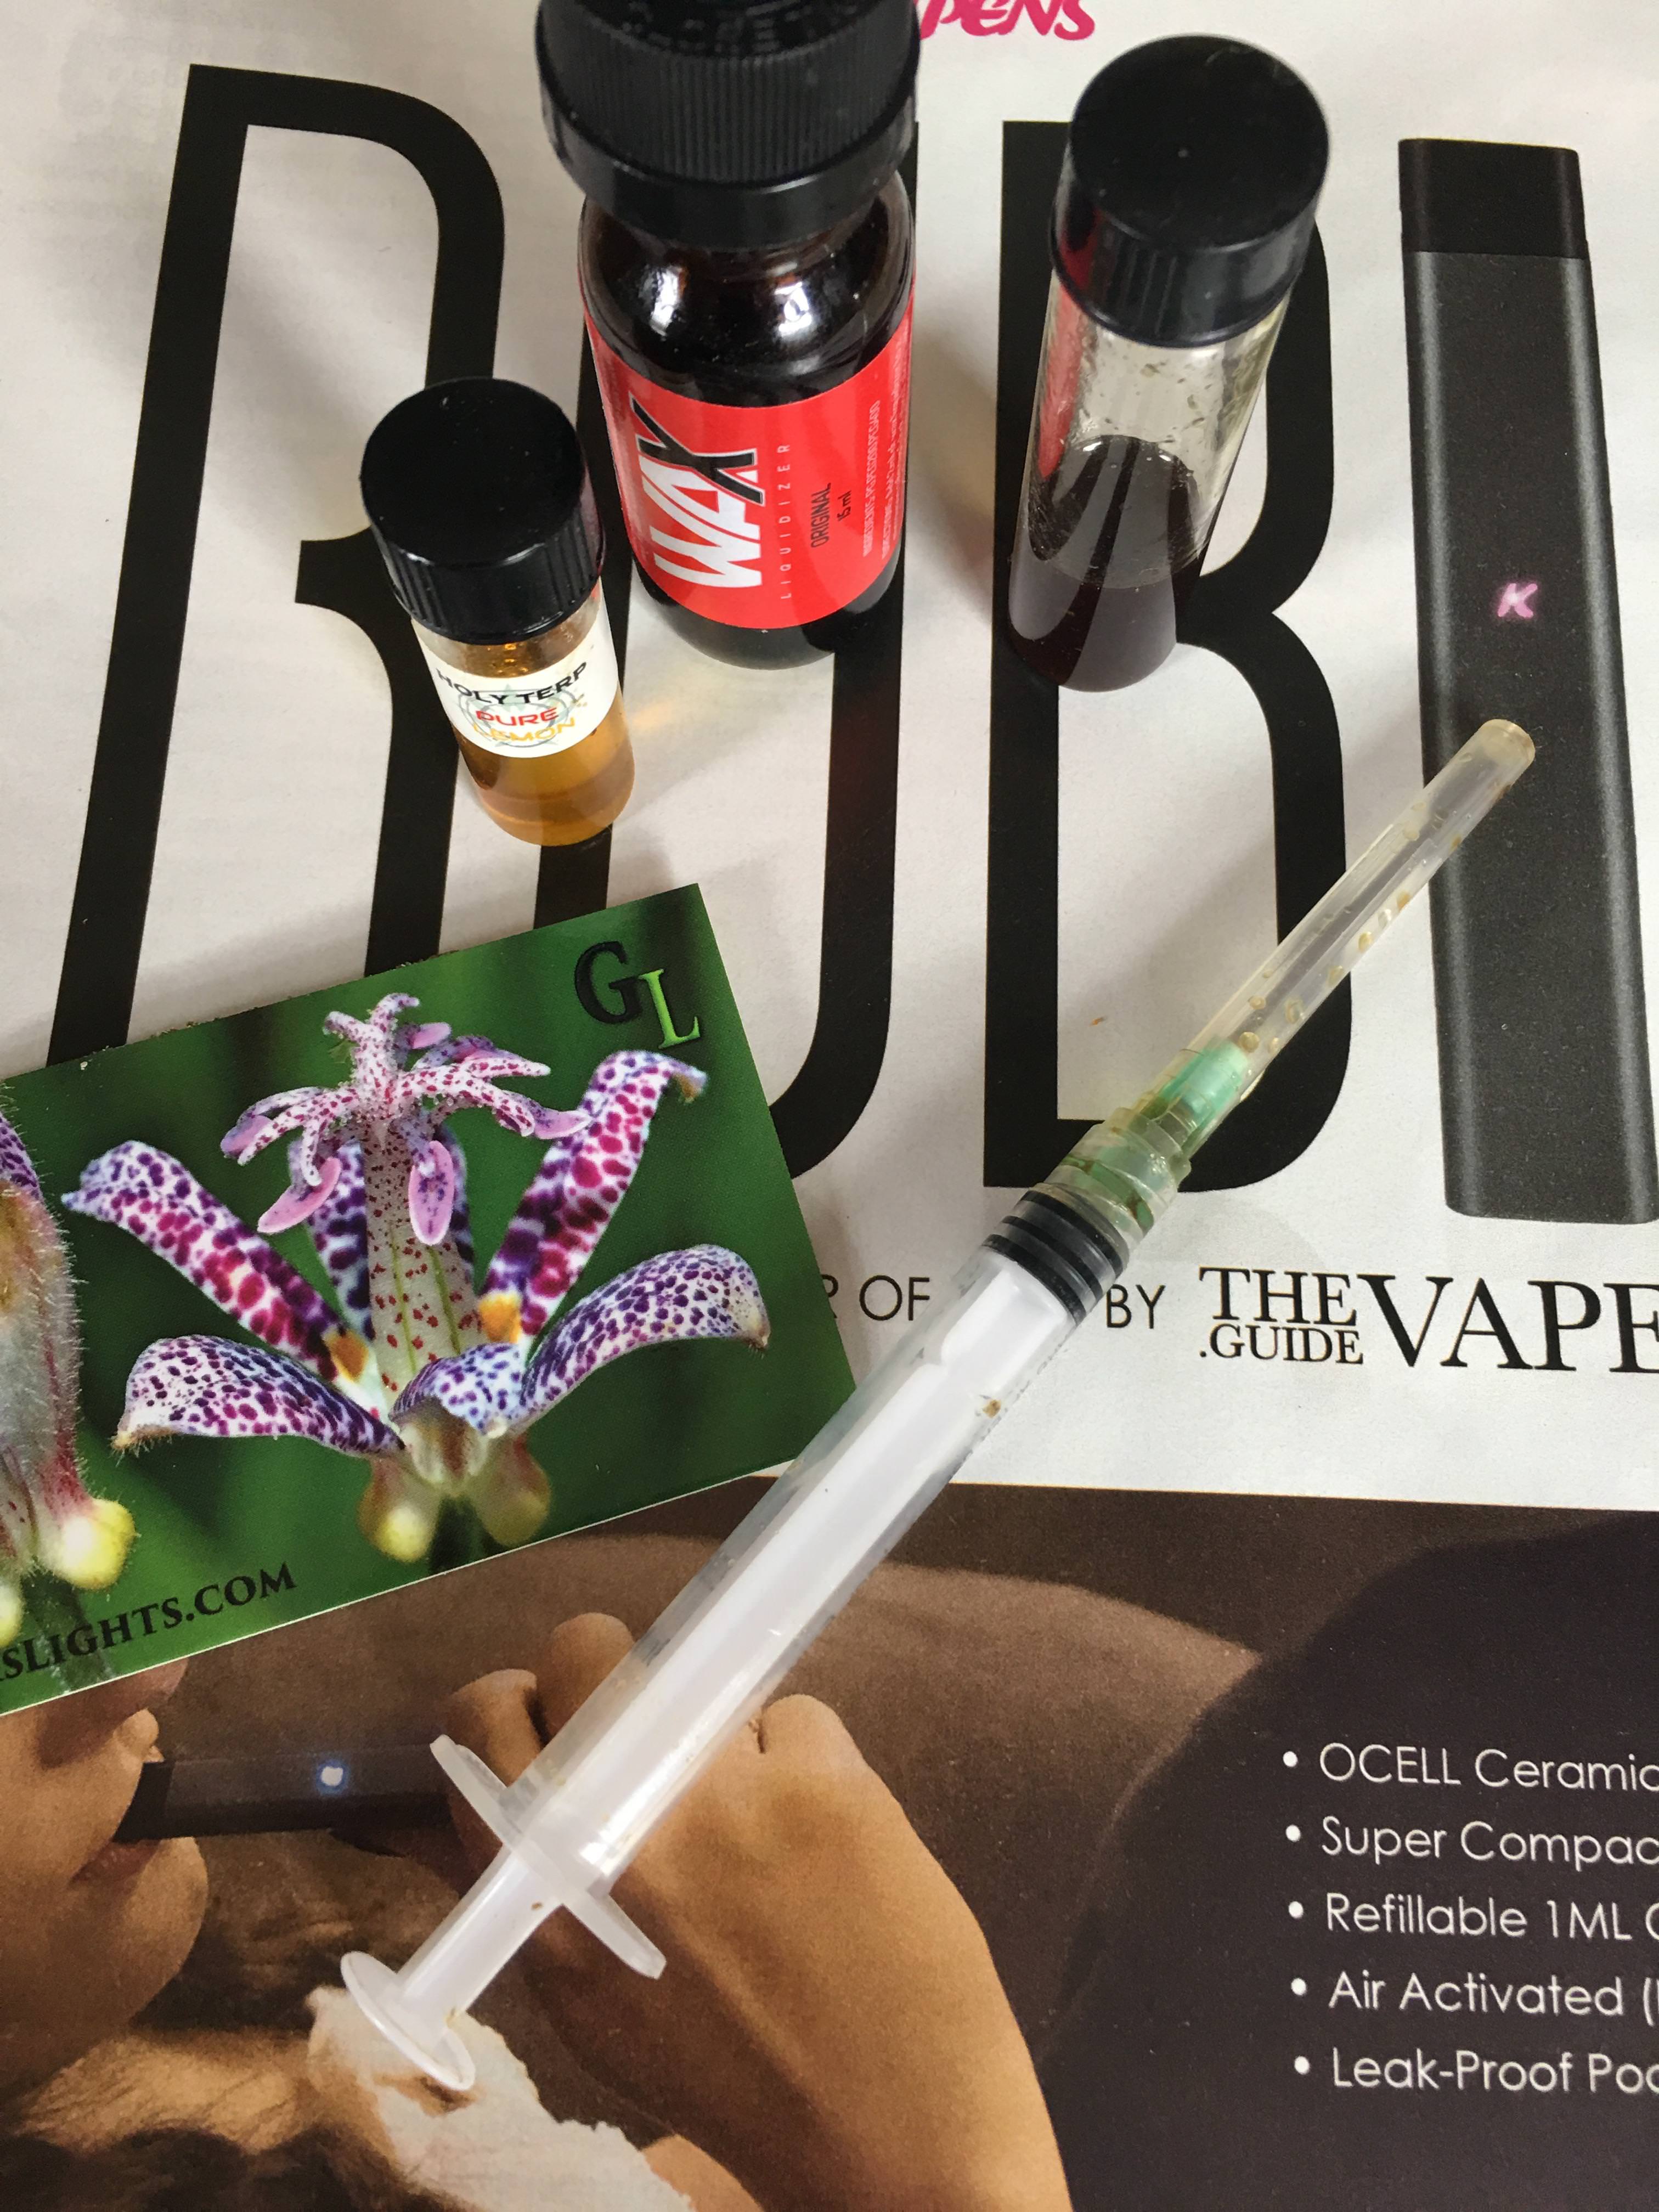 Turn your concentrates into e-liquid with Wax Liquidizer!